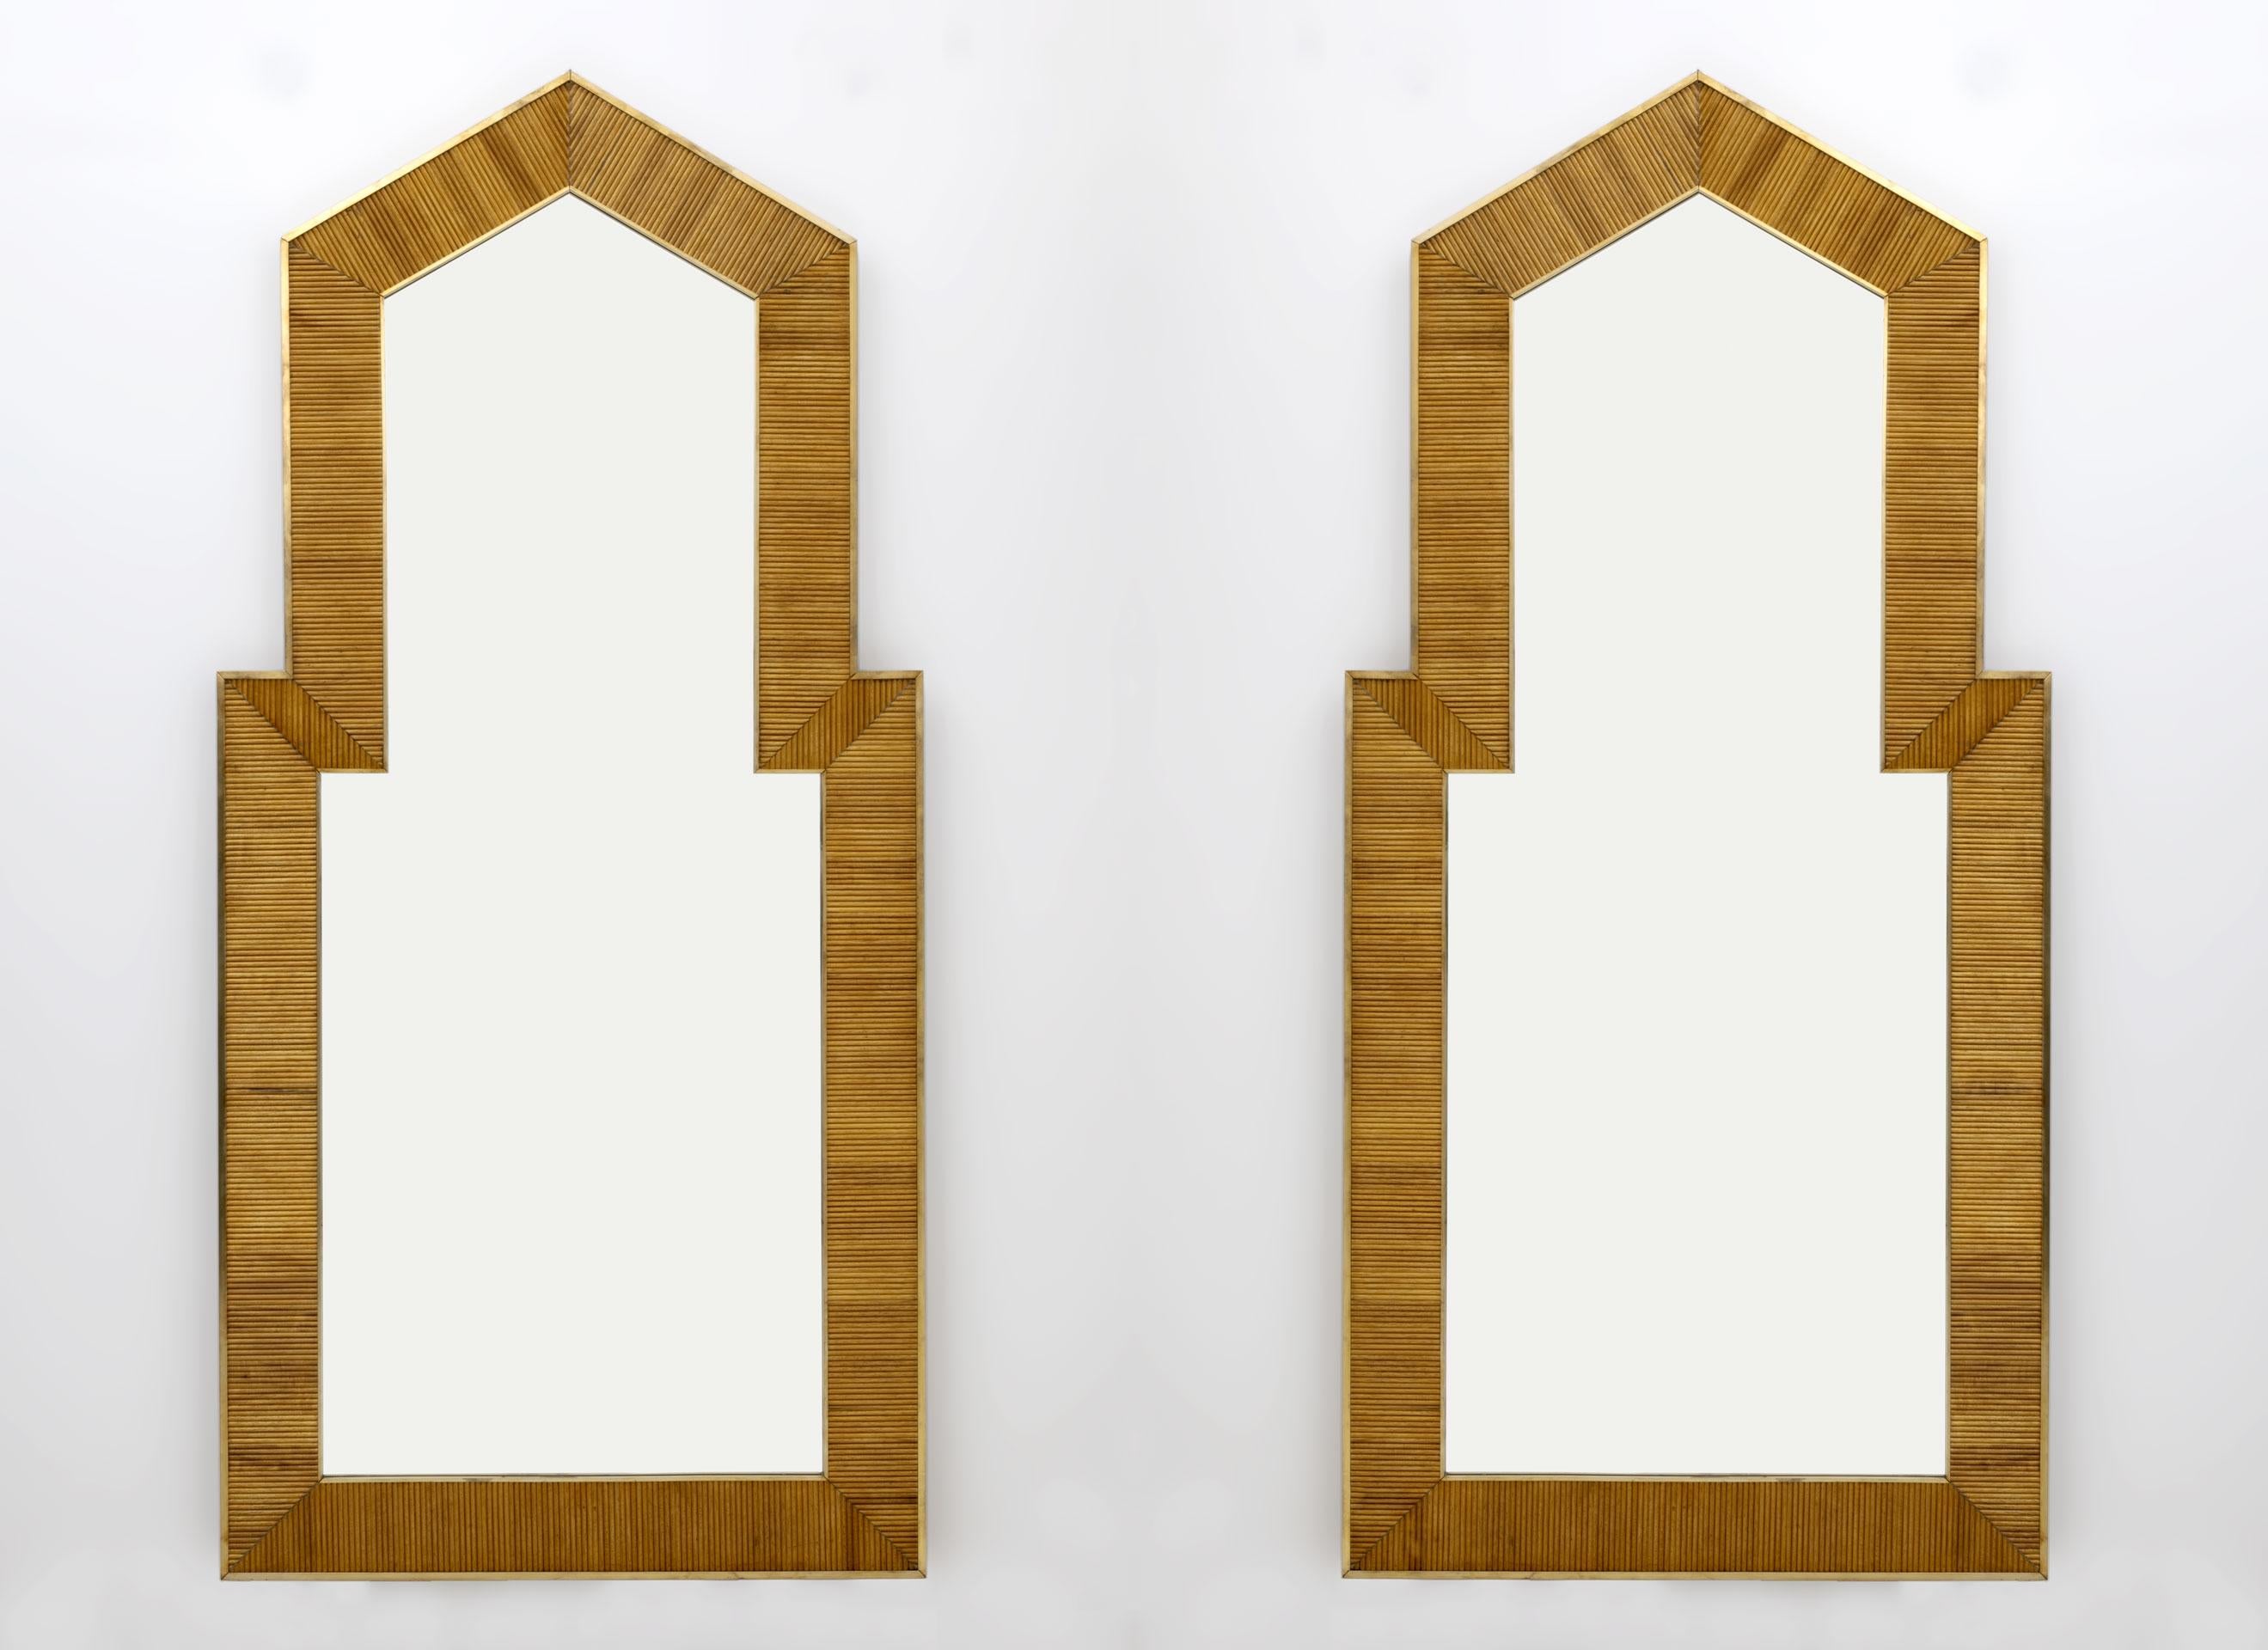 Pair of 70s wall mirrors, in the style of Gabriella Crespi, in wood and brass, breadstick workmanship.
The price is each and the shipping cost refers to the single mirror.